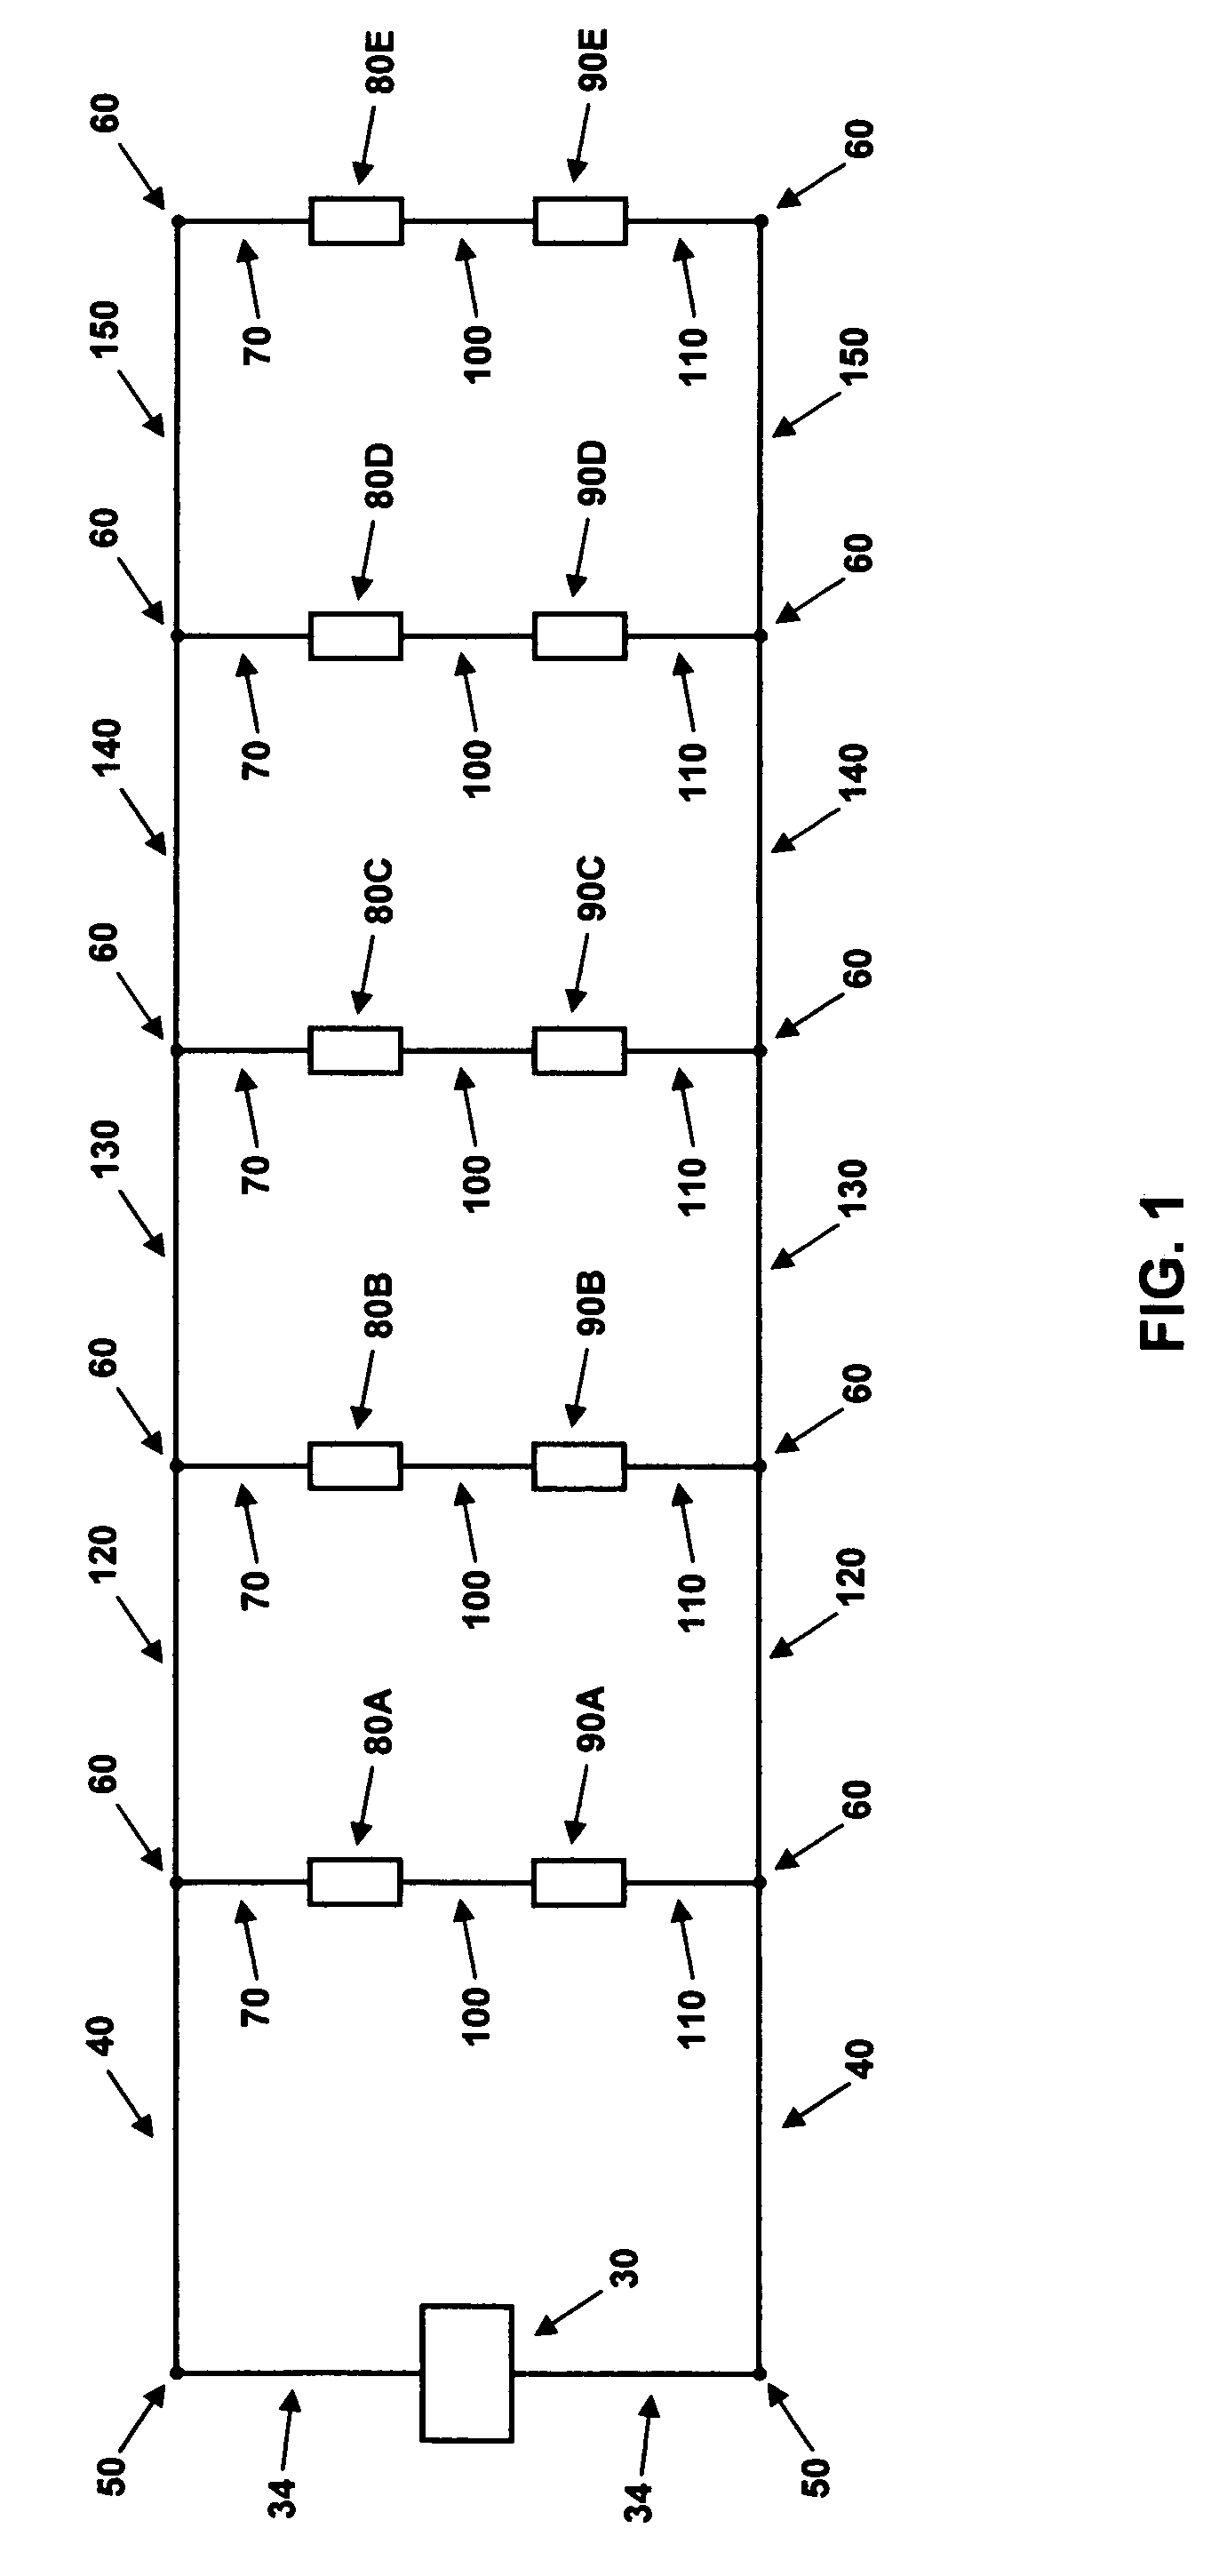 Voltage equalization method and apparatus for low-voltage lighting systems